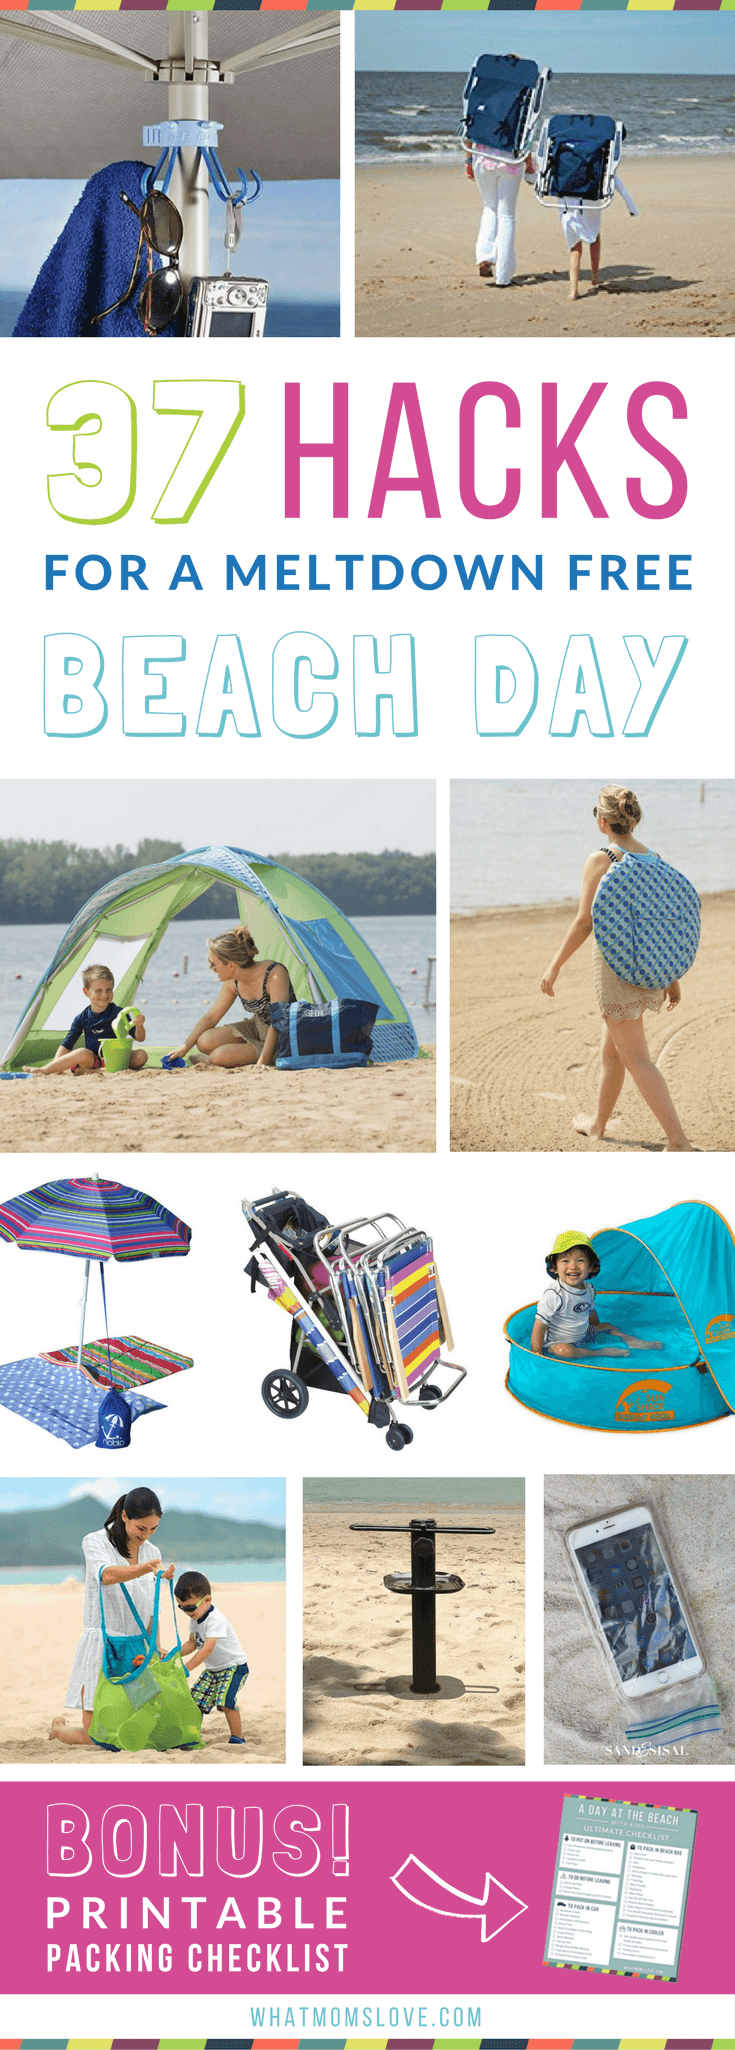 Beach Hacks, Tips and Tricks | The best clever ideas to keep kids happy at the beach this summer. Good tips for families with babies, toddlers and teens.